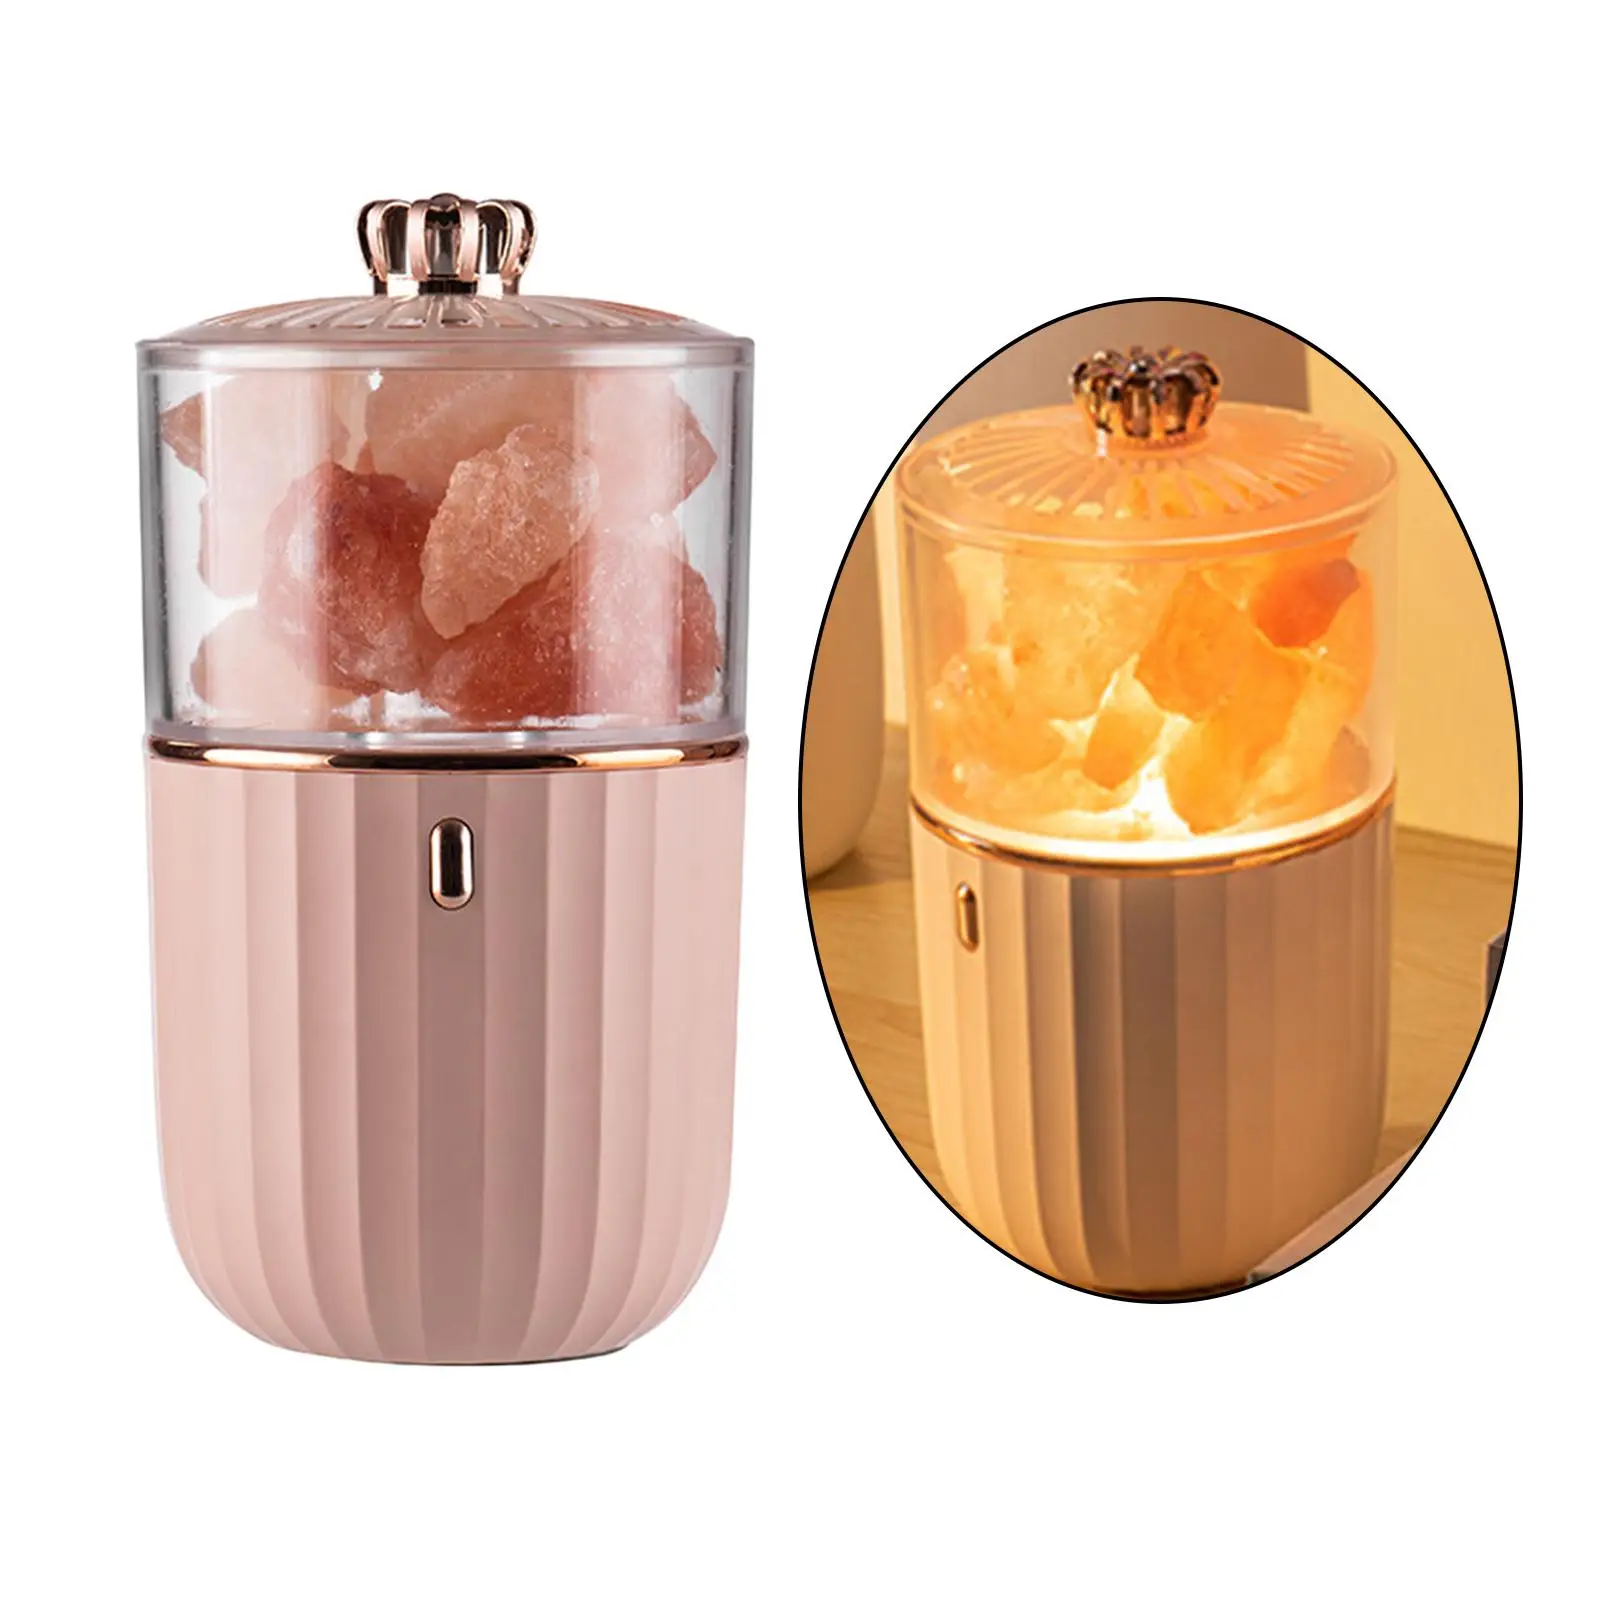 Himalayan Salt Lamp Essential Oil Diffuser Quiet with 7 LED Light 2 in 1 for Office